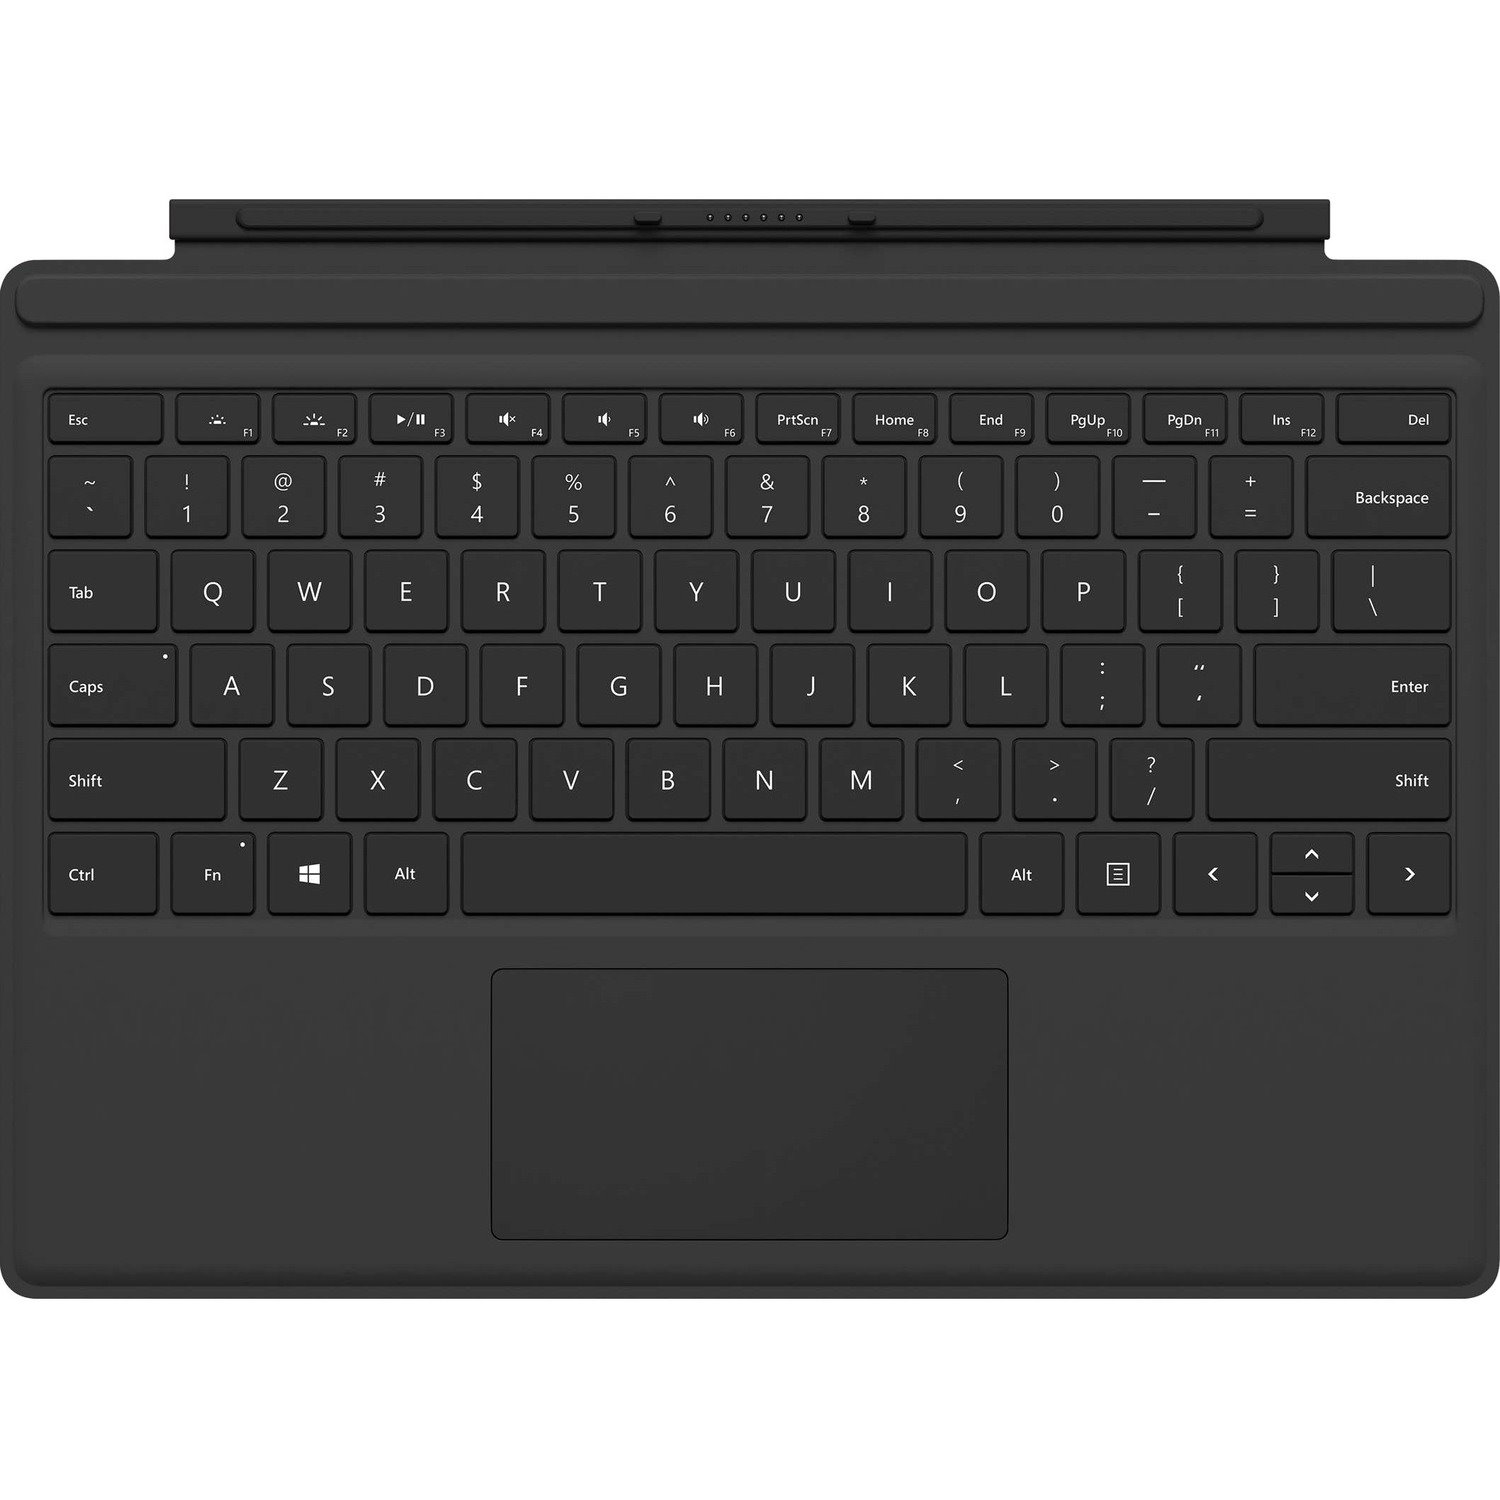 Microsoft Surface Pro Keyboard - with trackpad and accelerometer - Black